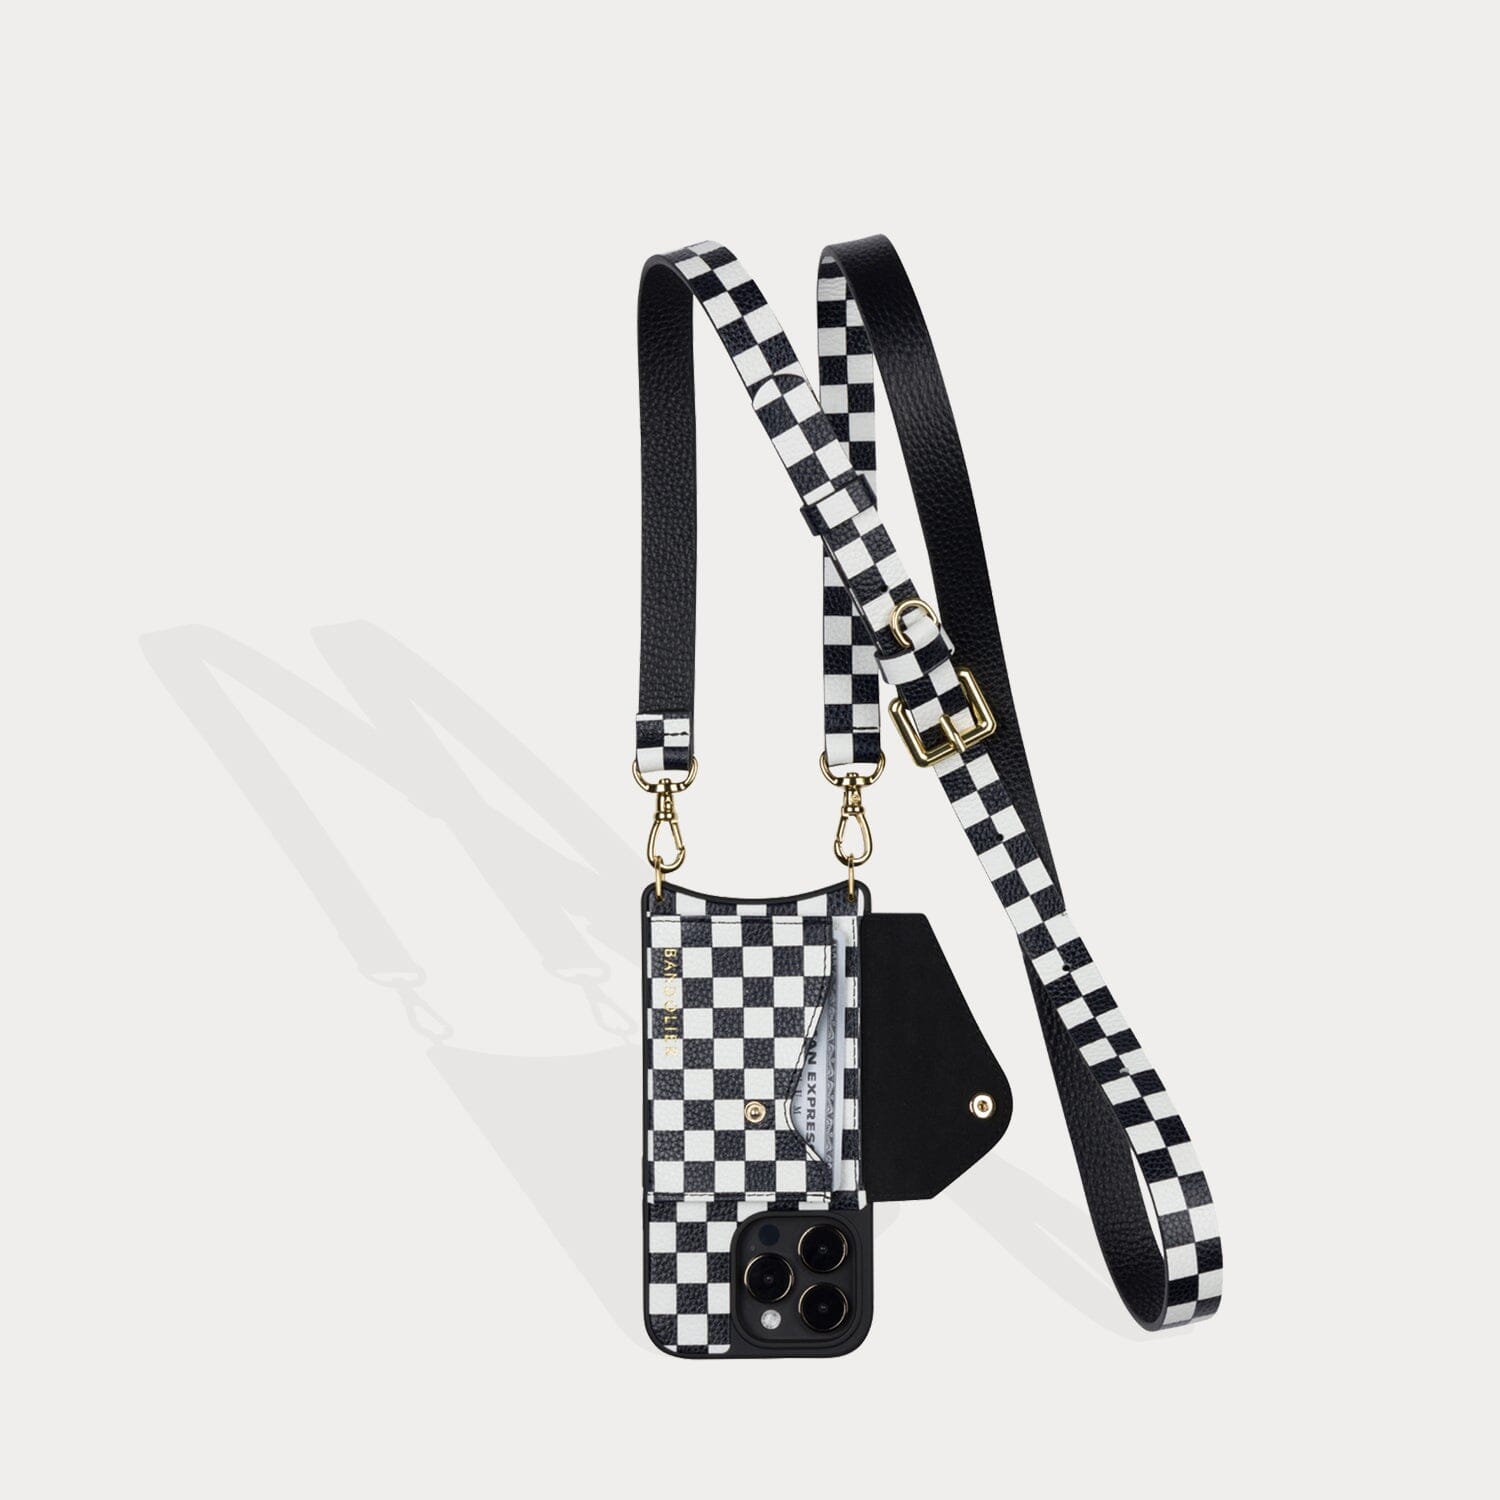 Hailey Side Slot Leather Crossbody Bandolier - Checker/Gold Mobile Phone Cases Bandolier 